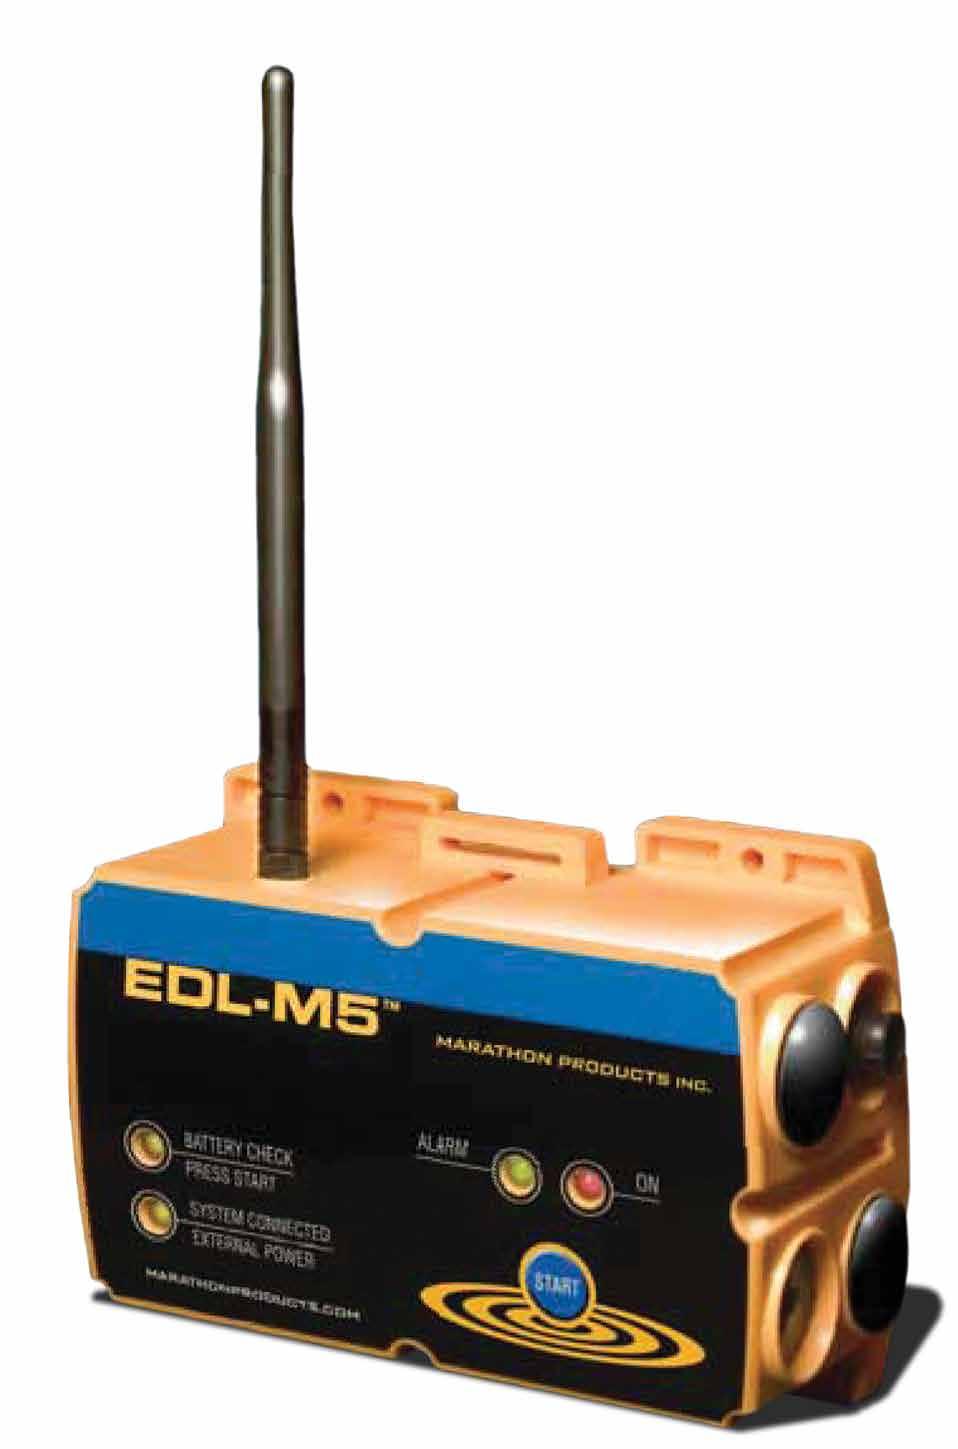 EDL-M5 Rugged Remote Temperature Management for Facilities, Warehouses, Trucking, and Exterior Sites Wireless Sensor Connectivity The EDL-M5 has a powerful 2-way 900MHz radio for long range wireless